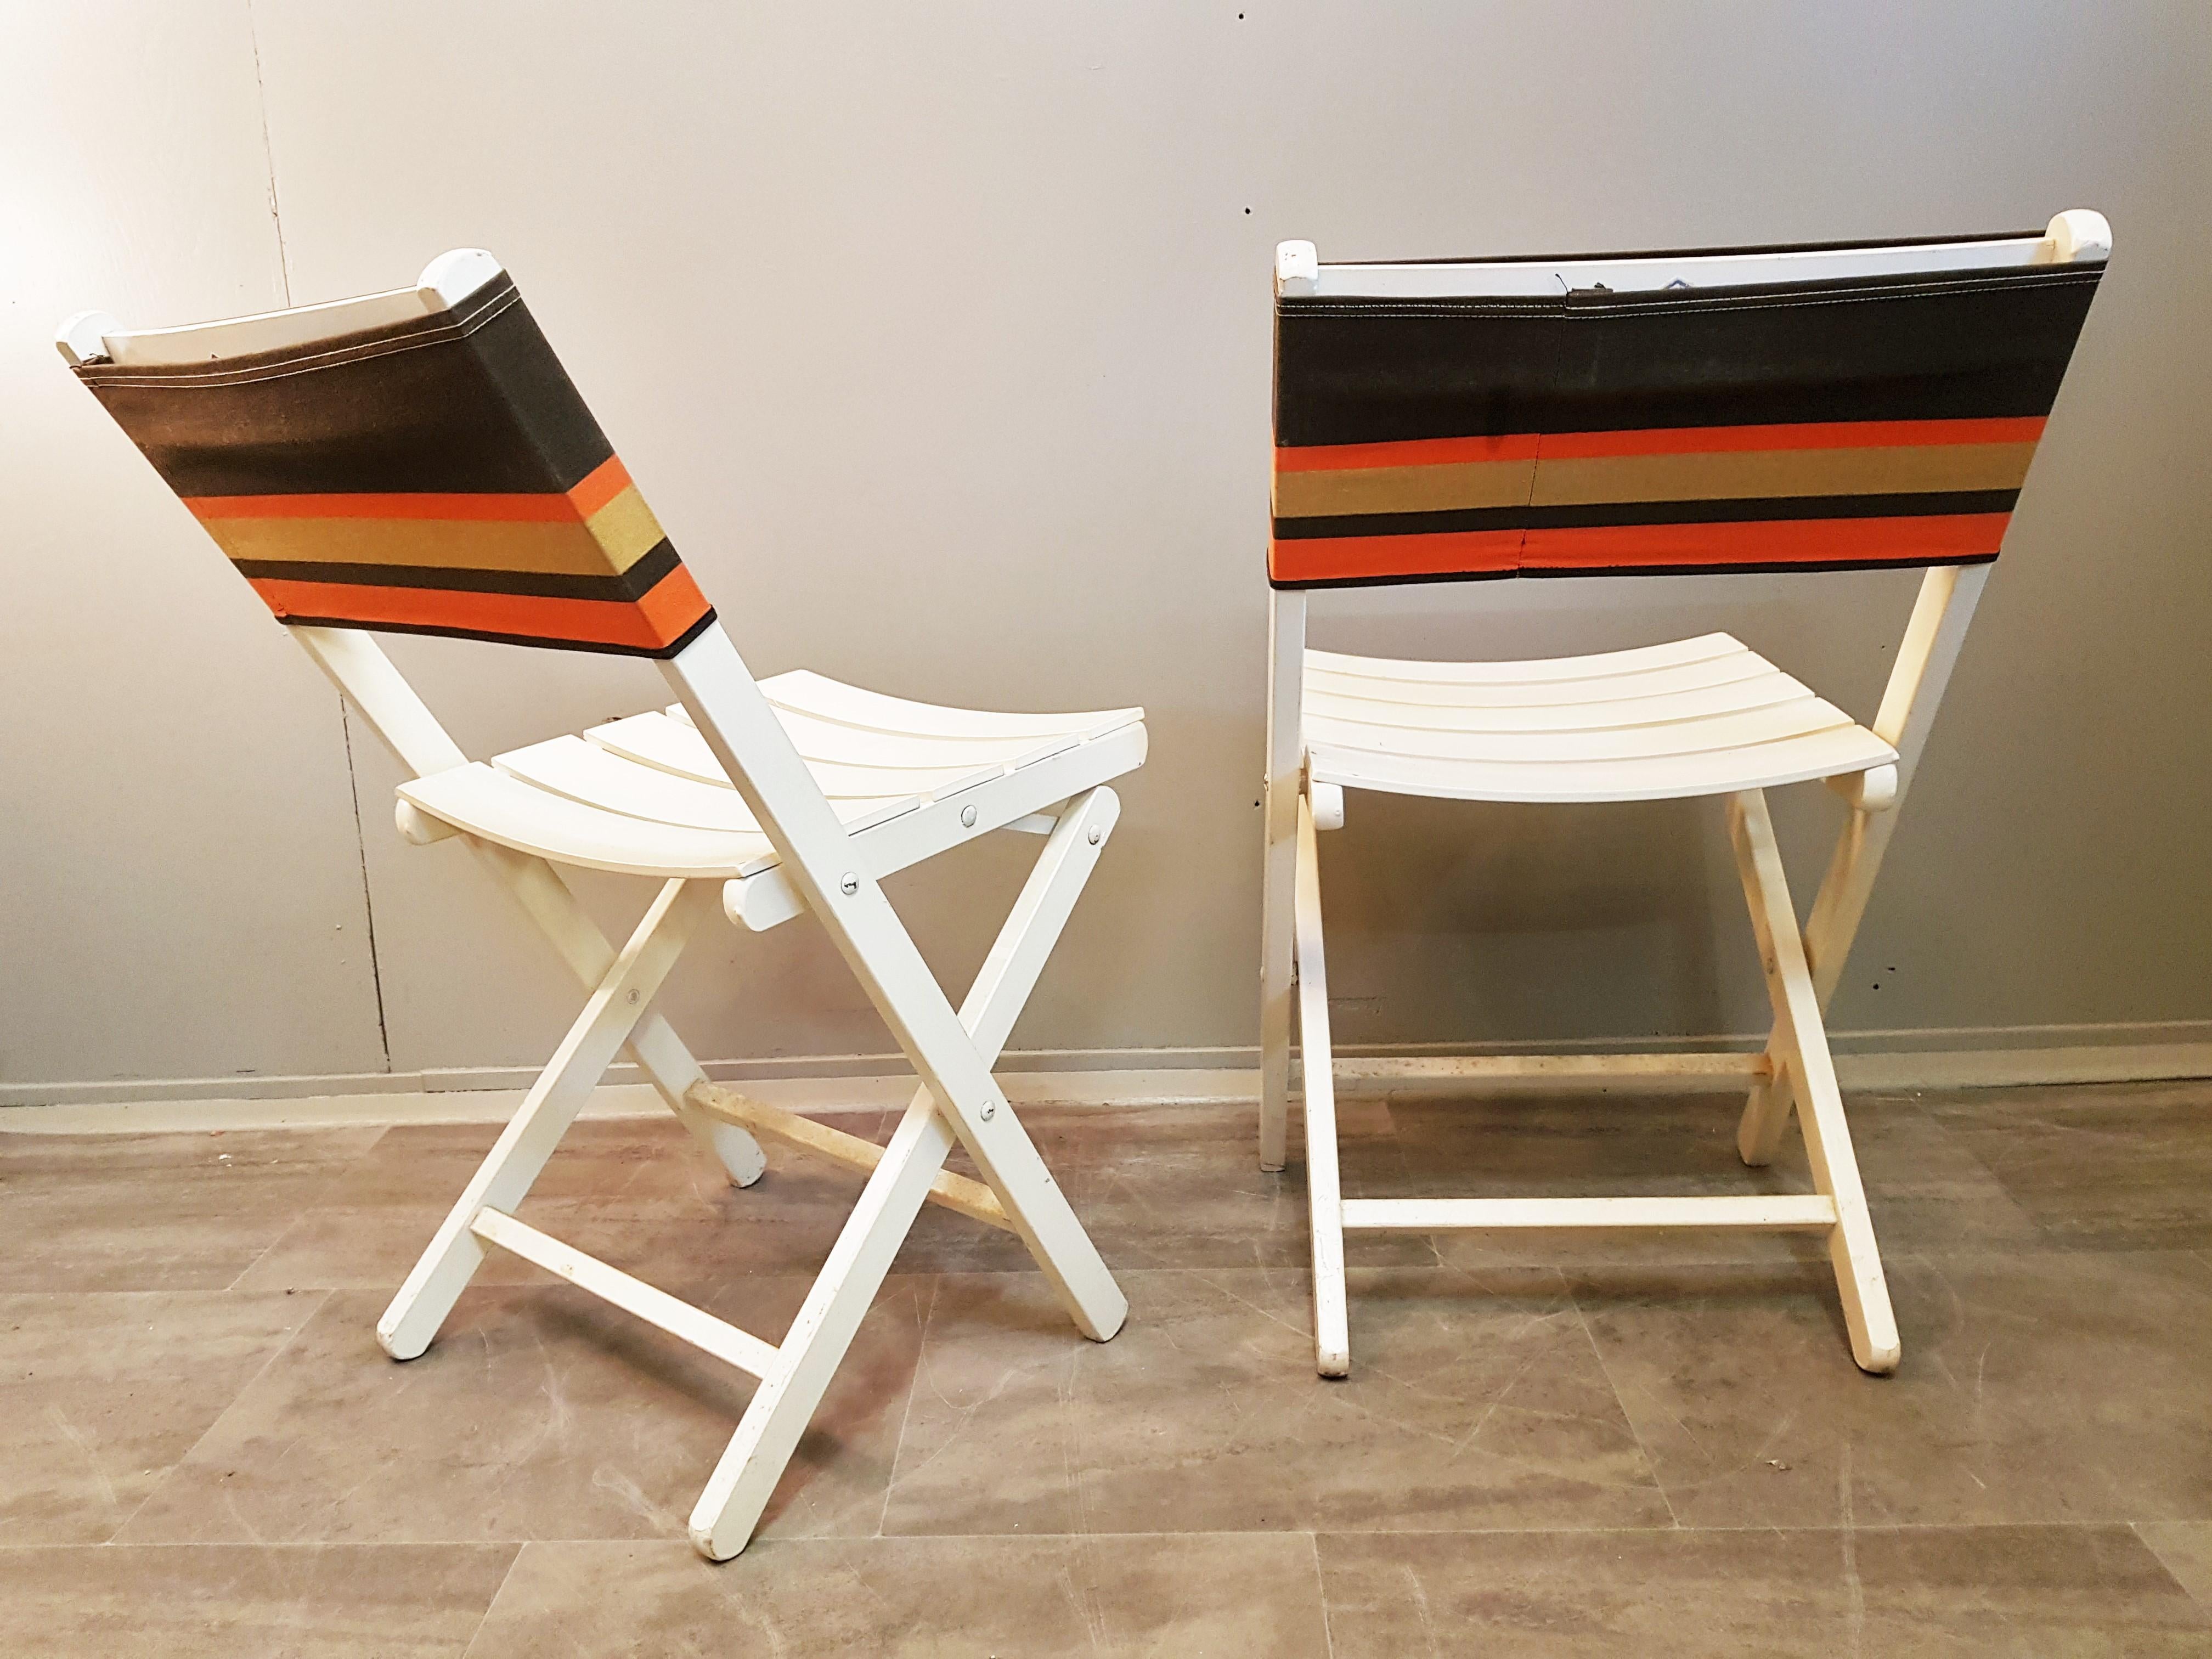 Boho Chic Set of 6 Midcentury Folding Chairs, France, 1960s For Sale 7